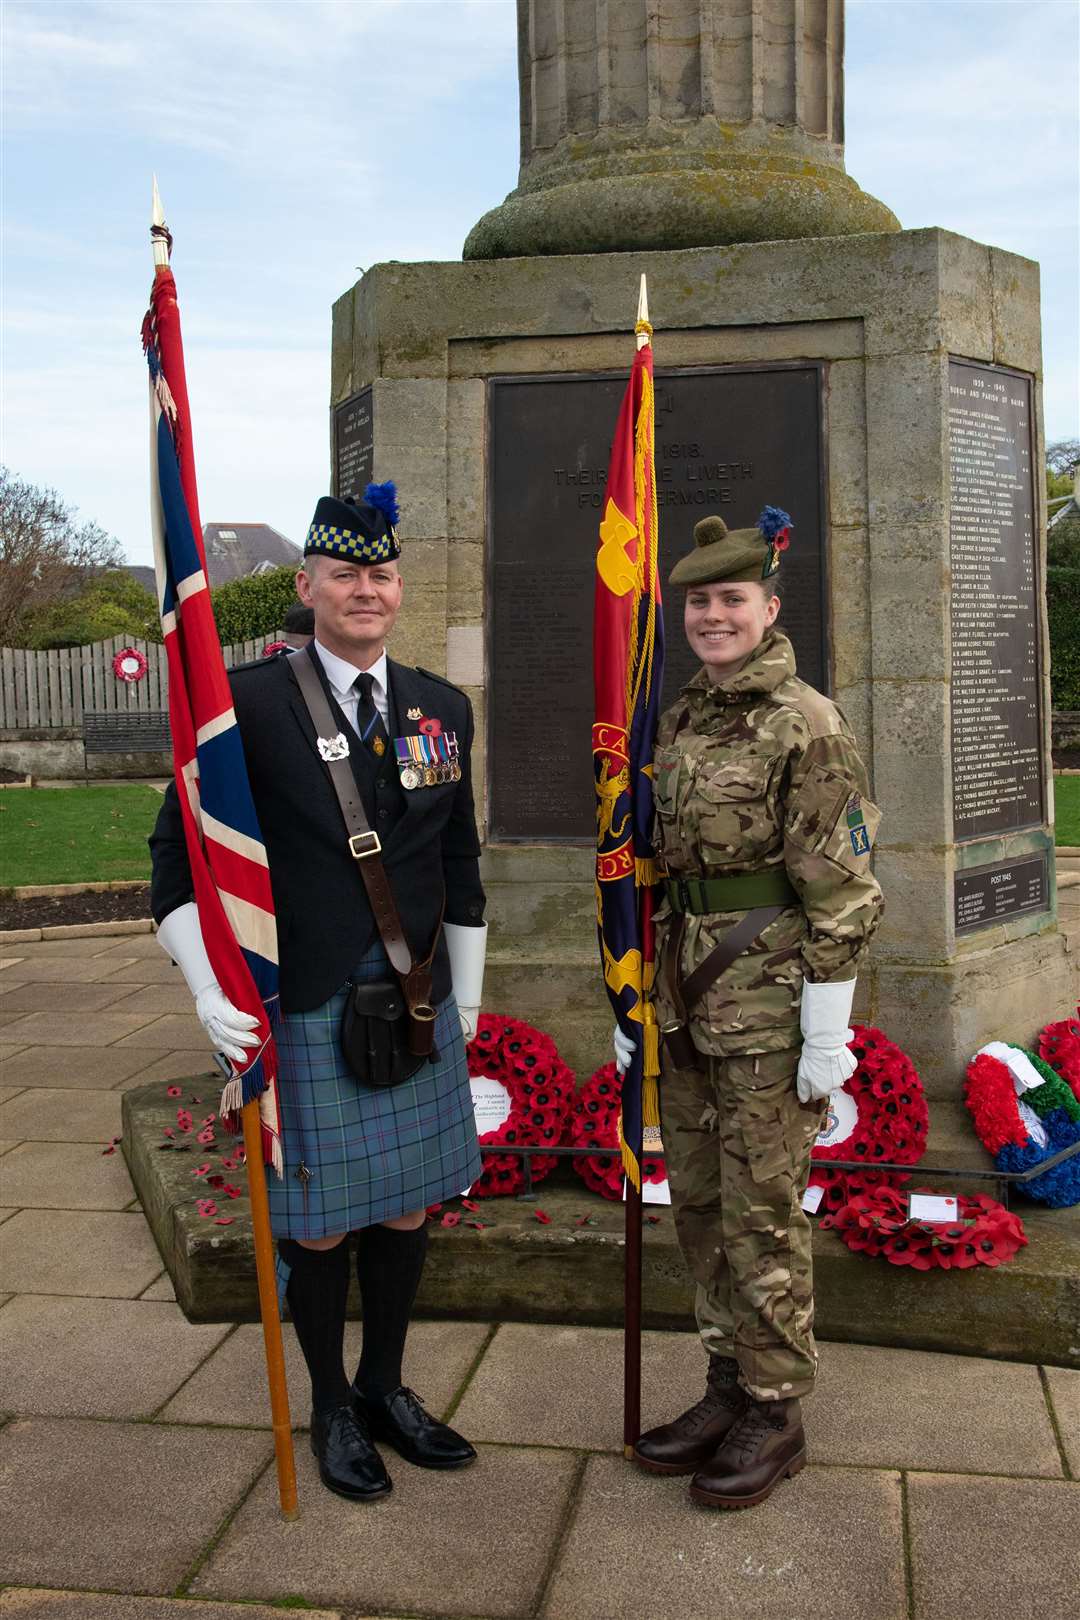 Father and daughter Dale and Darcey Woodman (15) who is an Army cadet on parade for the first time with the colours of the British Legion and the Army cadets in Nairn. Picture: Ian Macrae